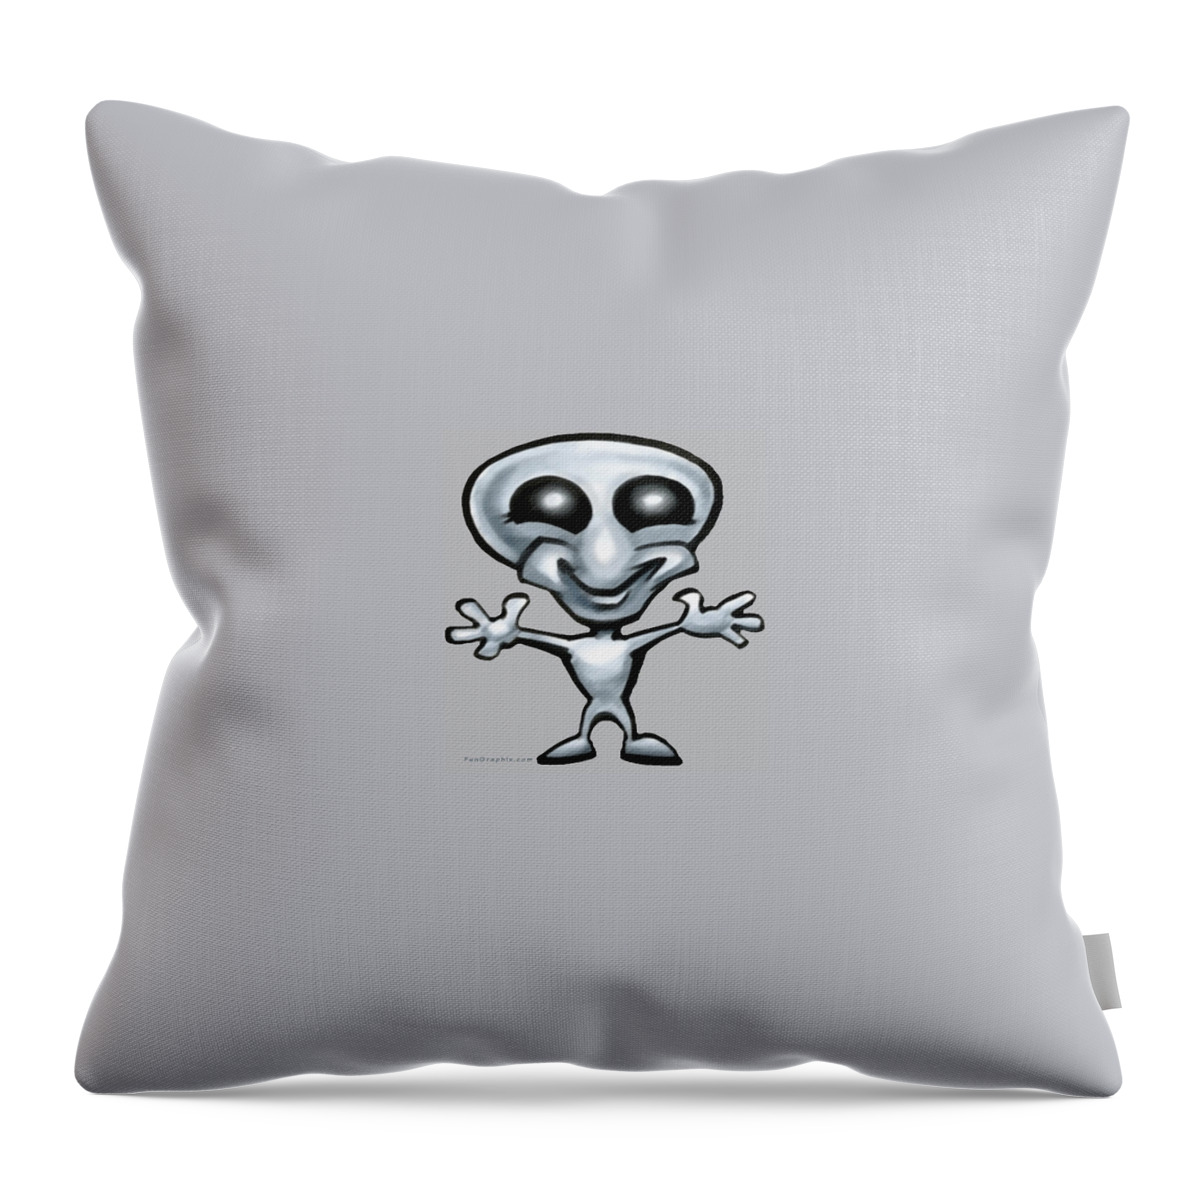 Alien Throw Pillow featuring the digital art Alien by Kevin Middleton